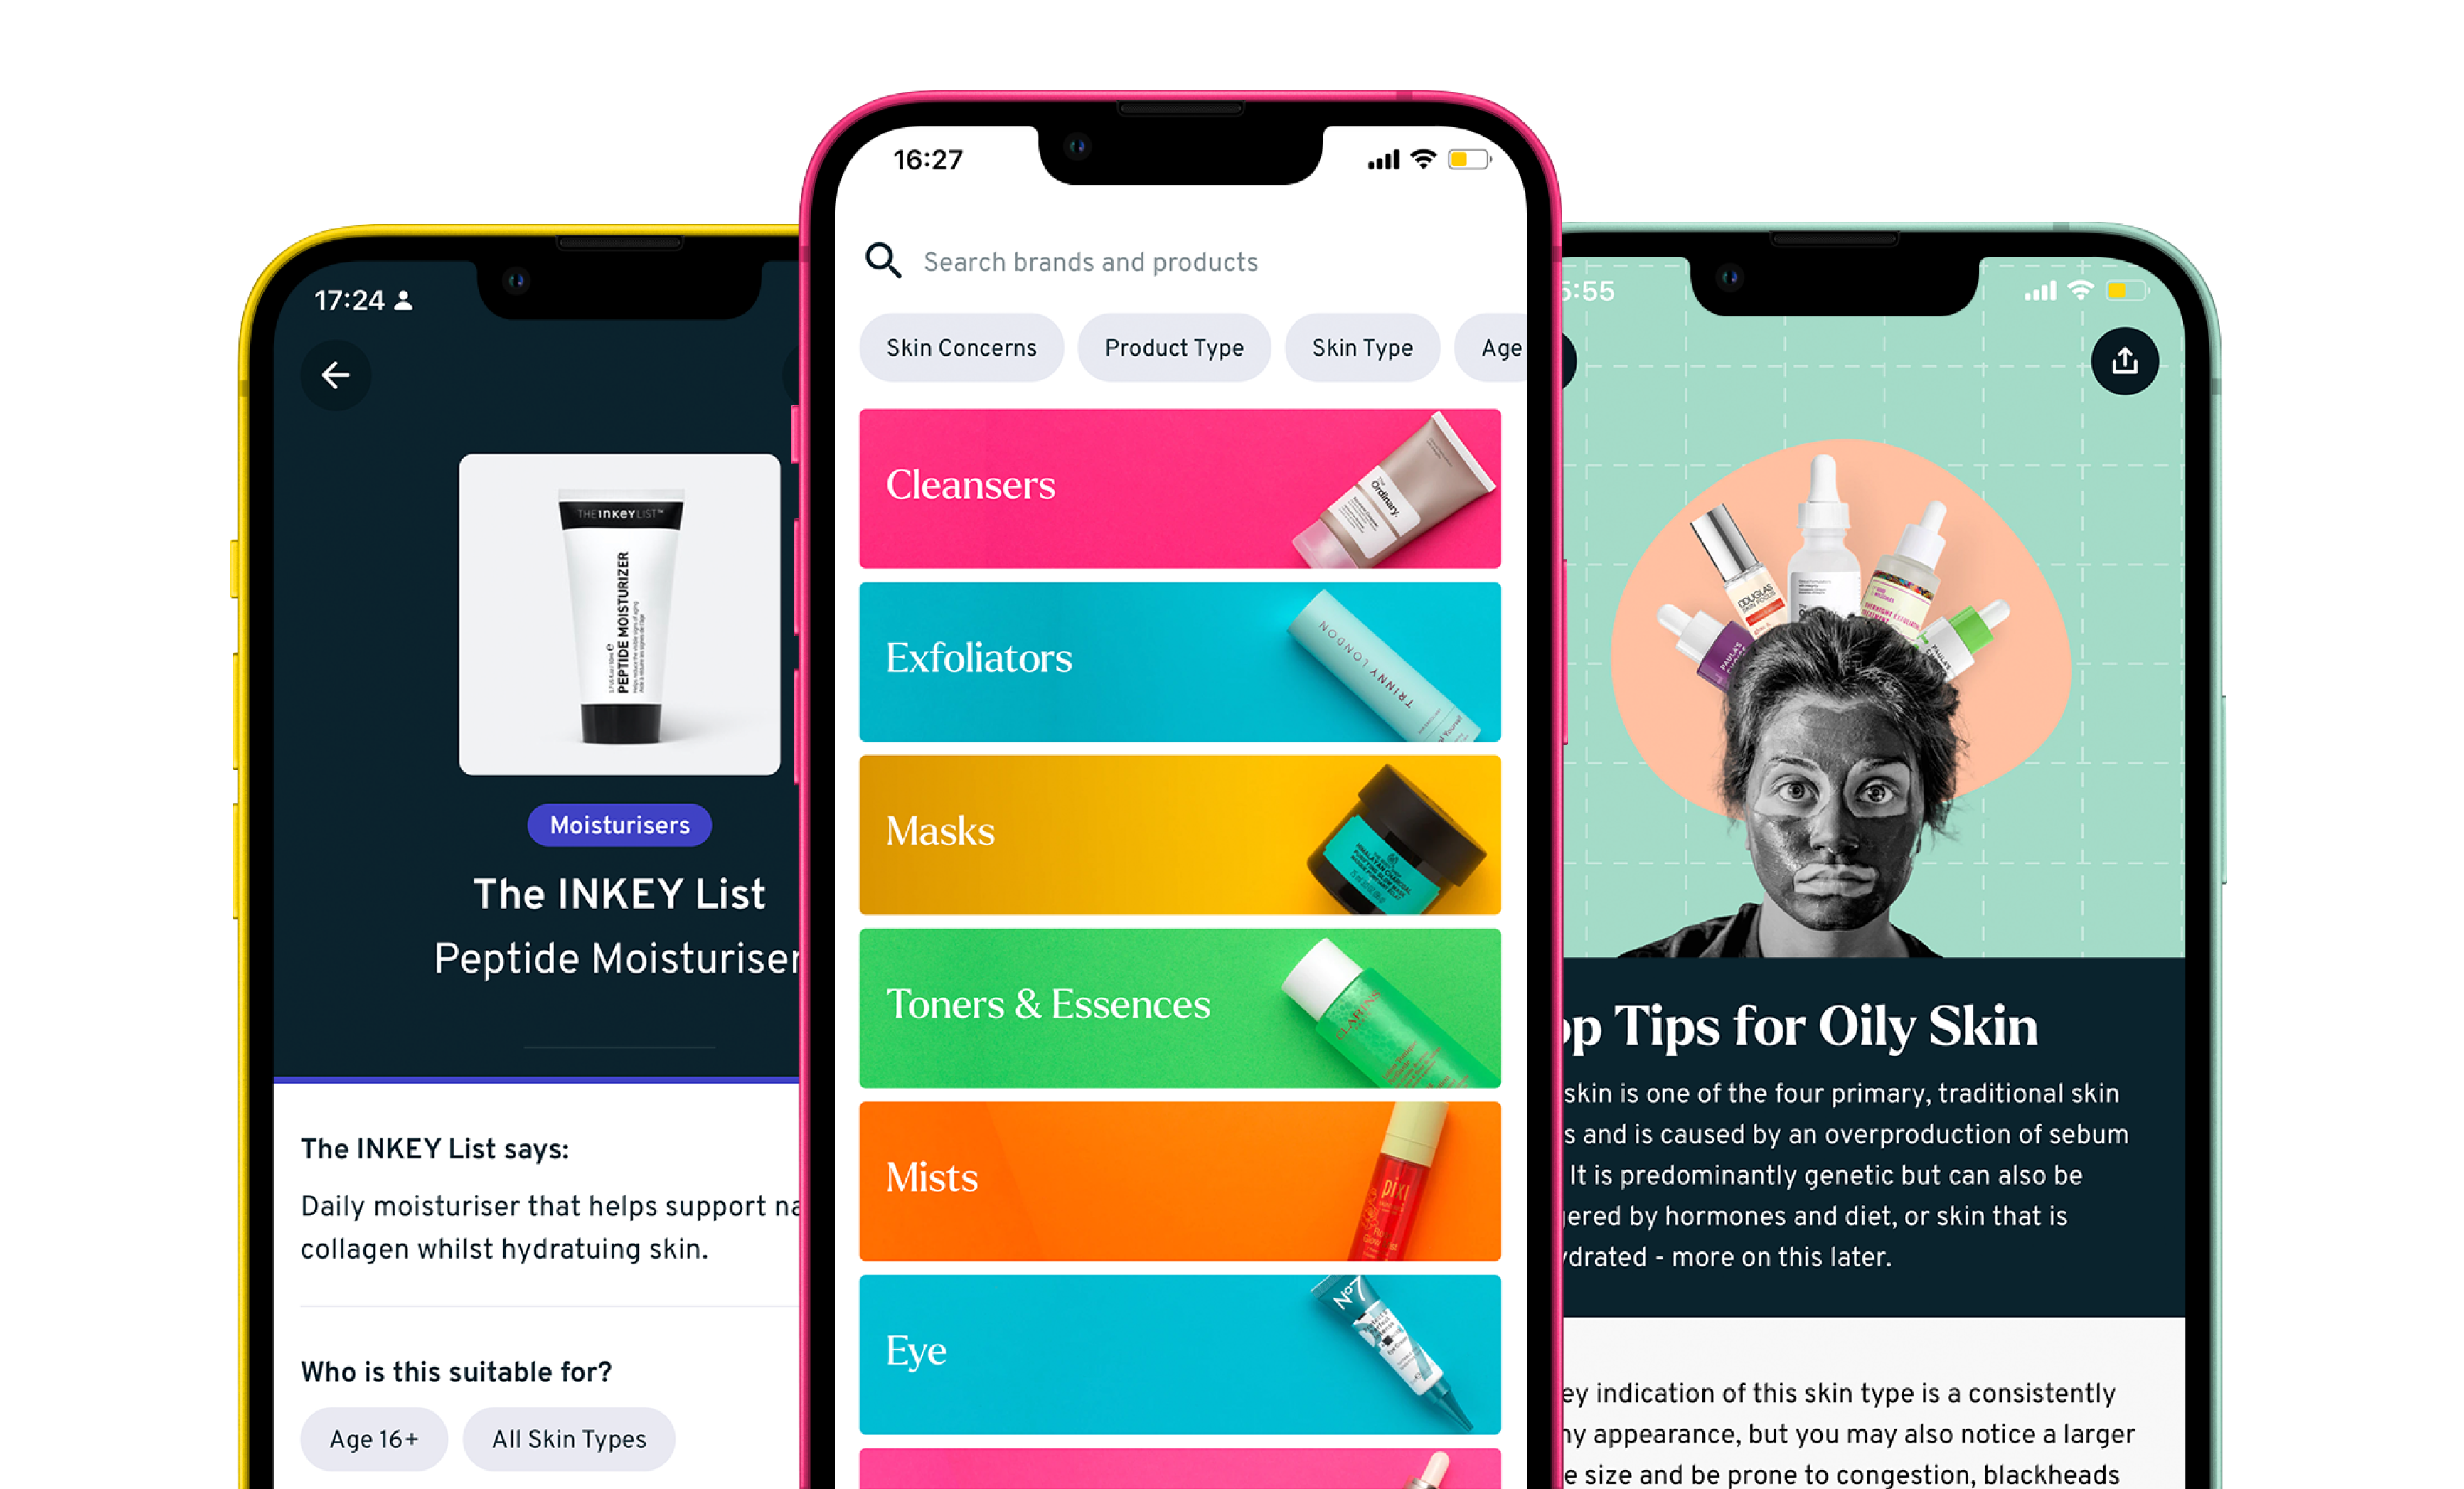 Image of 3 phone screens with different pages of the Skin Rocks App open on them in the following order: the product page for The Inkey List Peptide Moisturiser, The Products homepage, Top Tips for Oily Skin article.